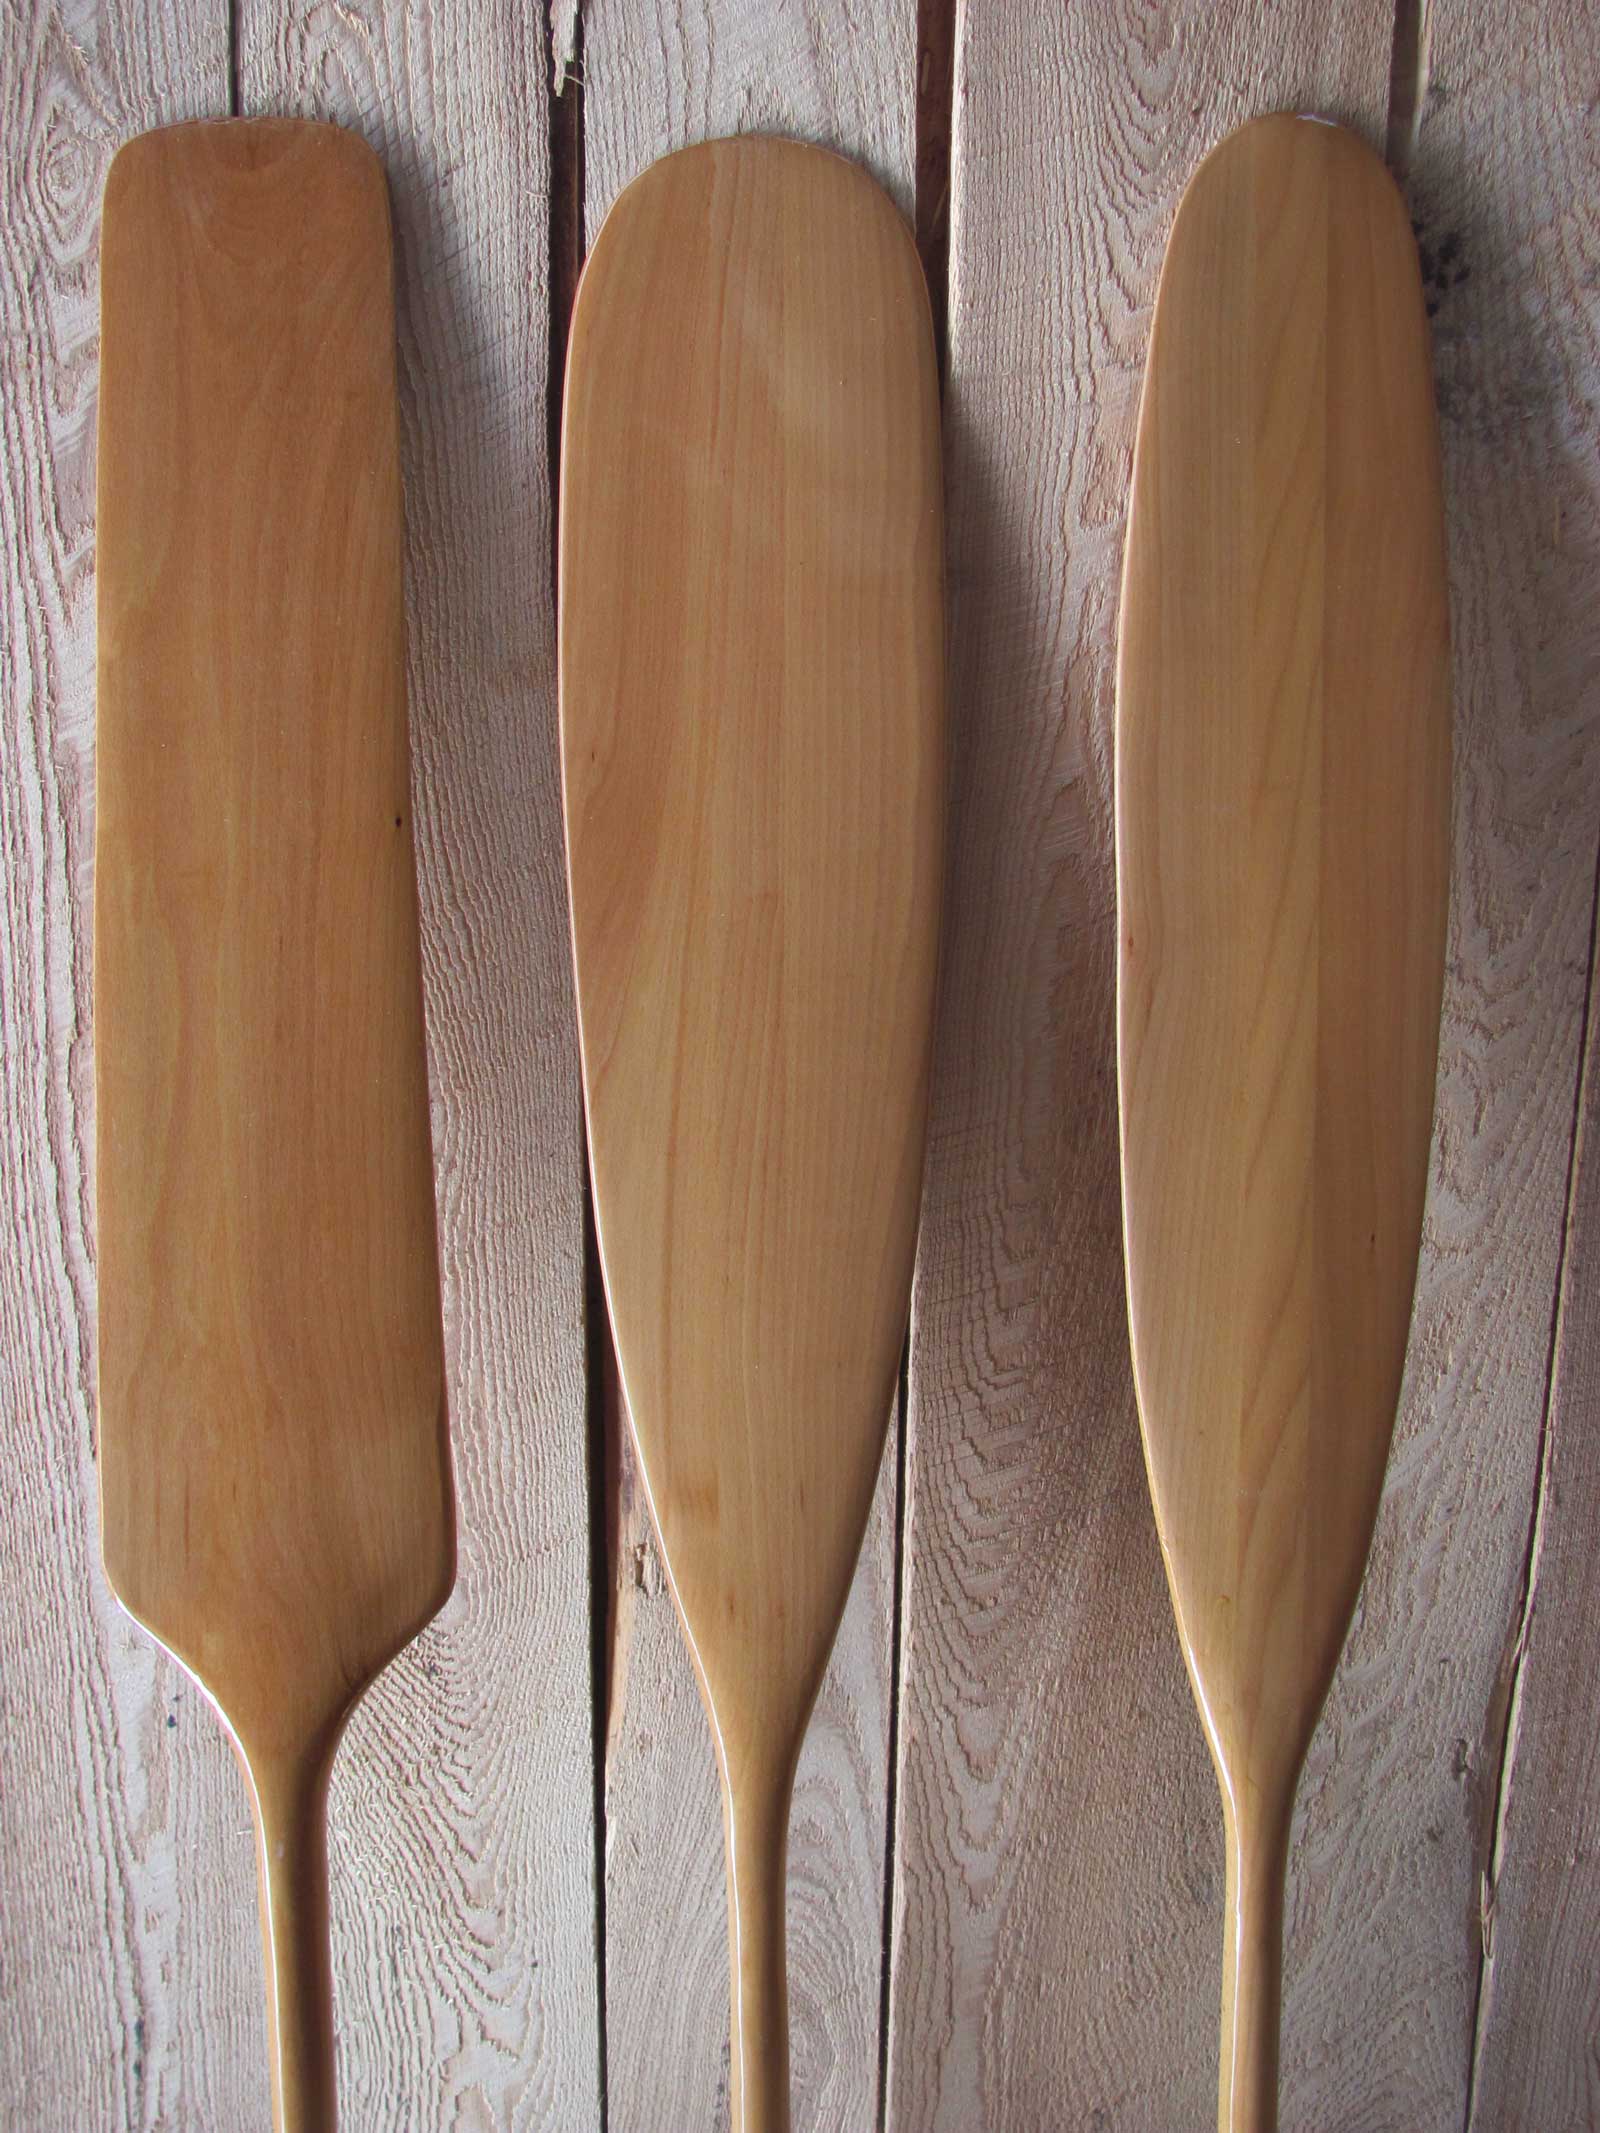 Voyageur, Beaver and Otter paddle in beech wood (from left)